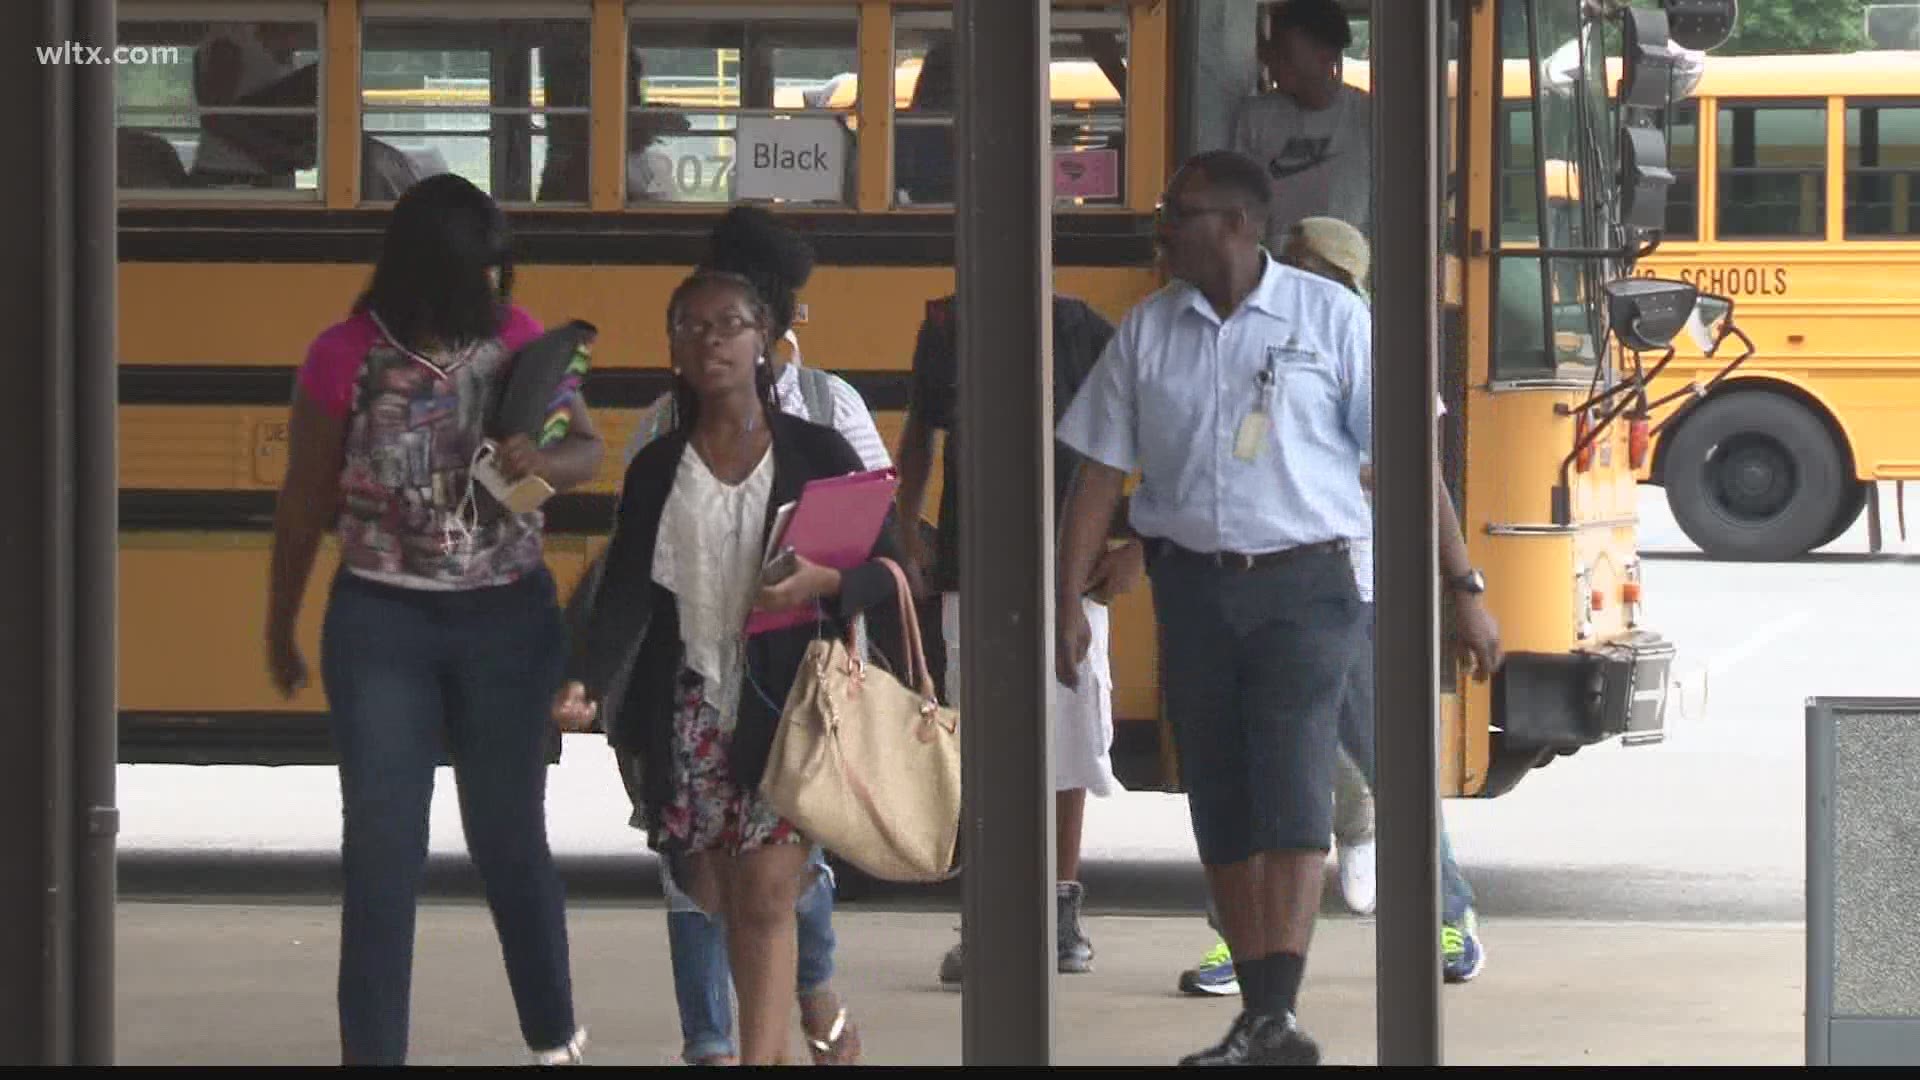 An intern at the school tested positive for the virus and the school will be closed through the week for cleaning.